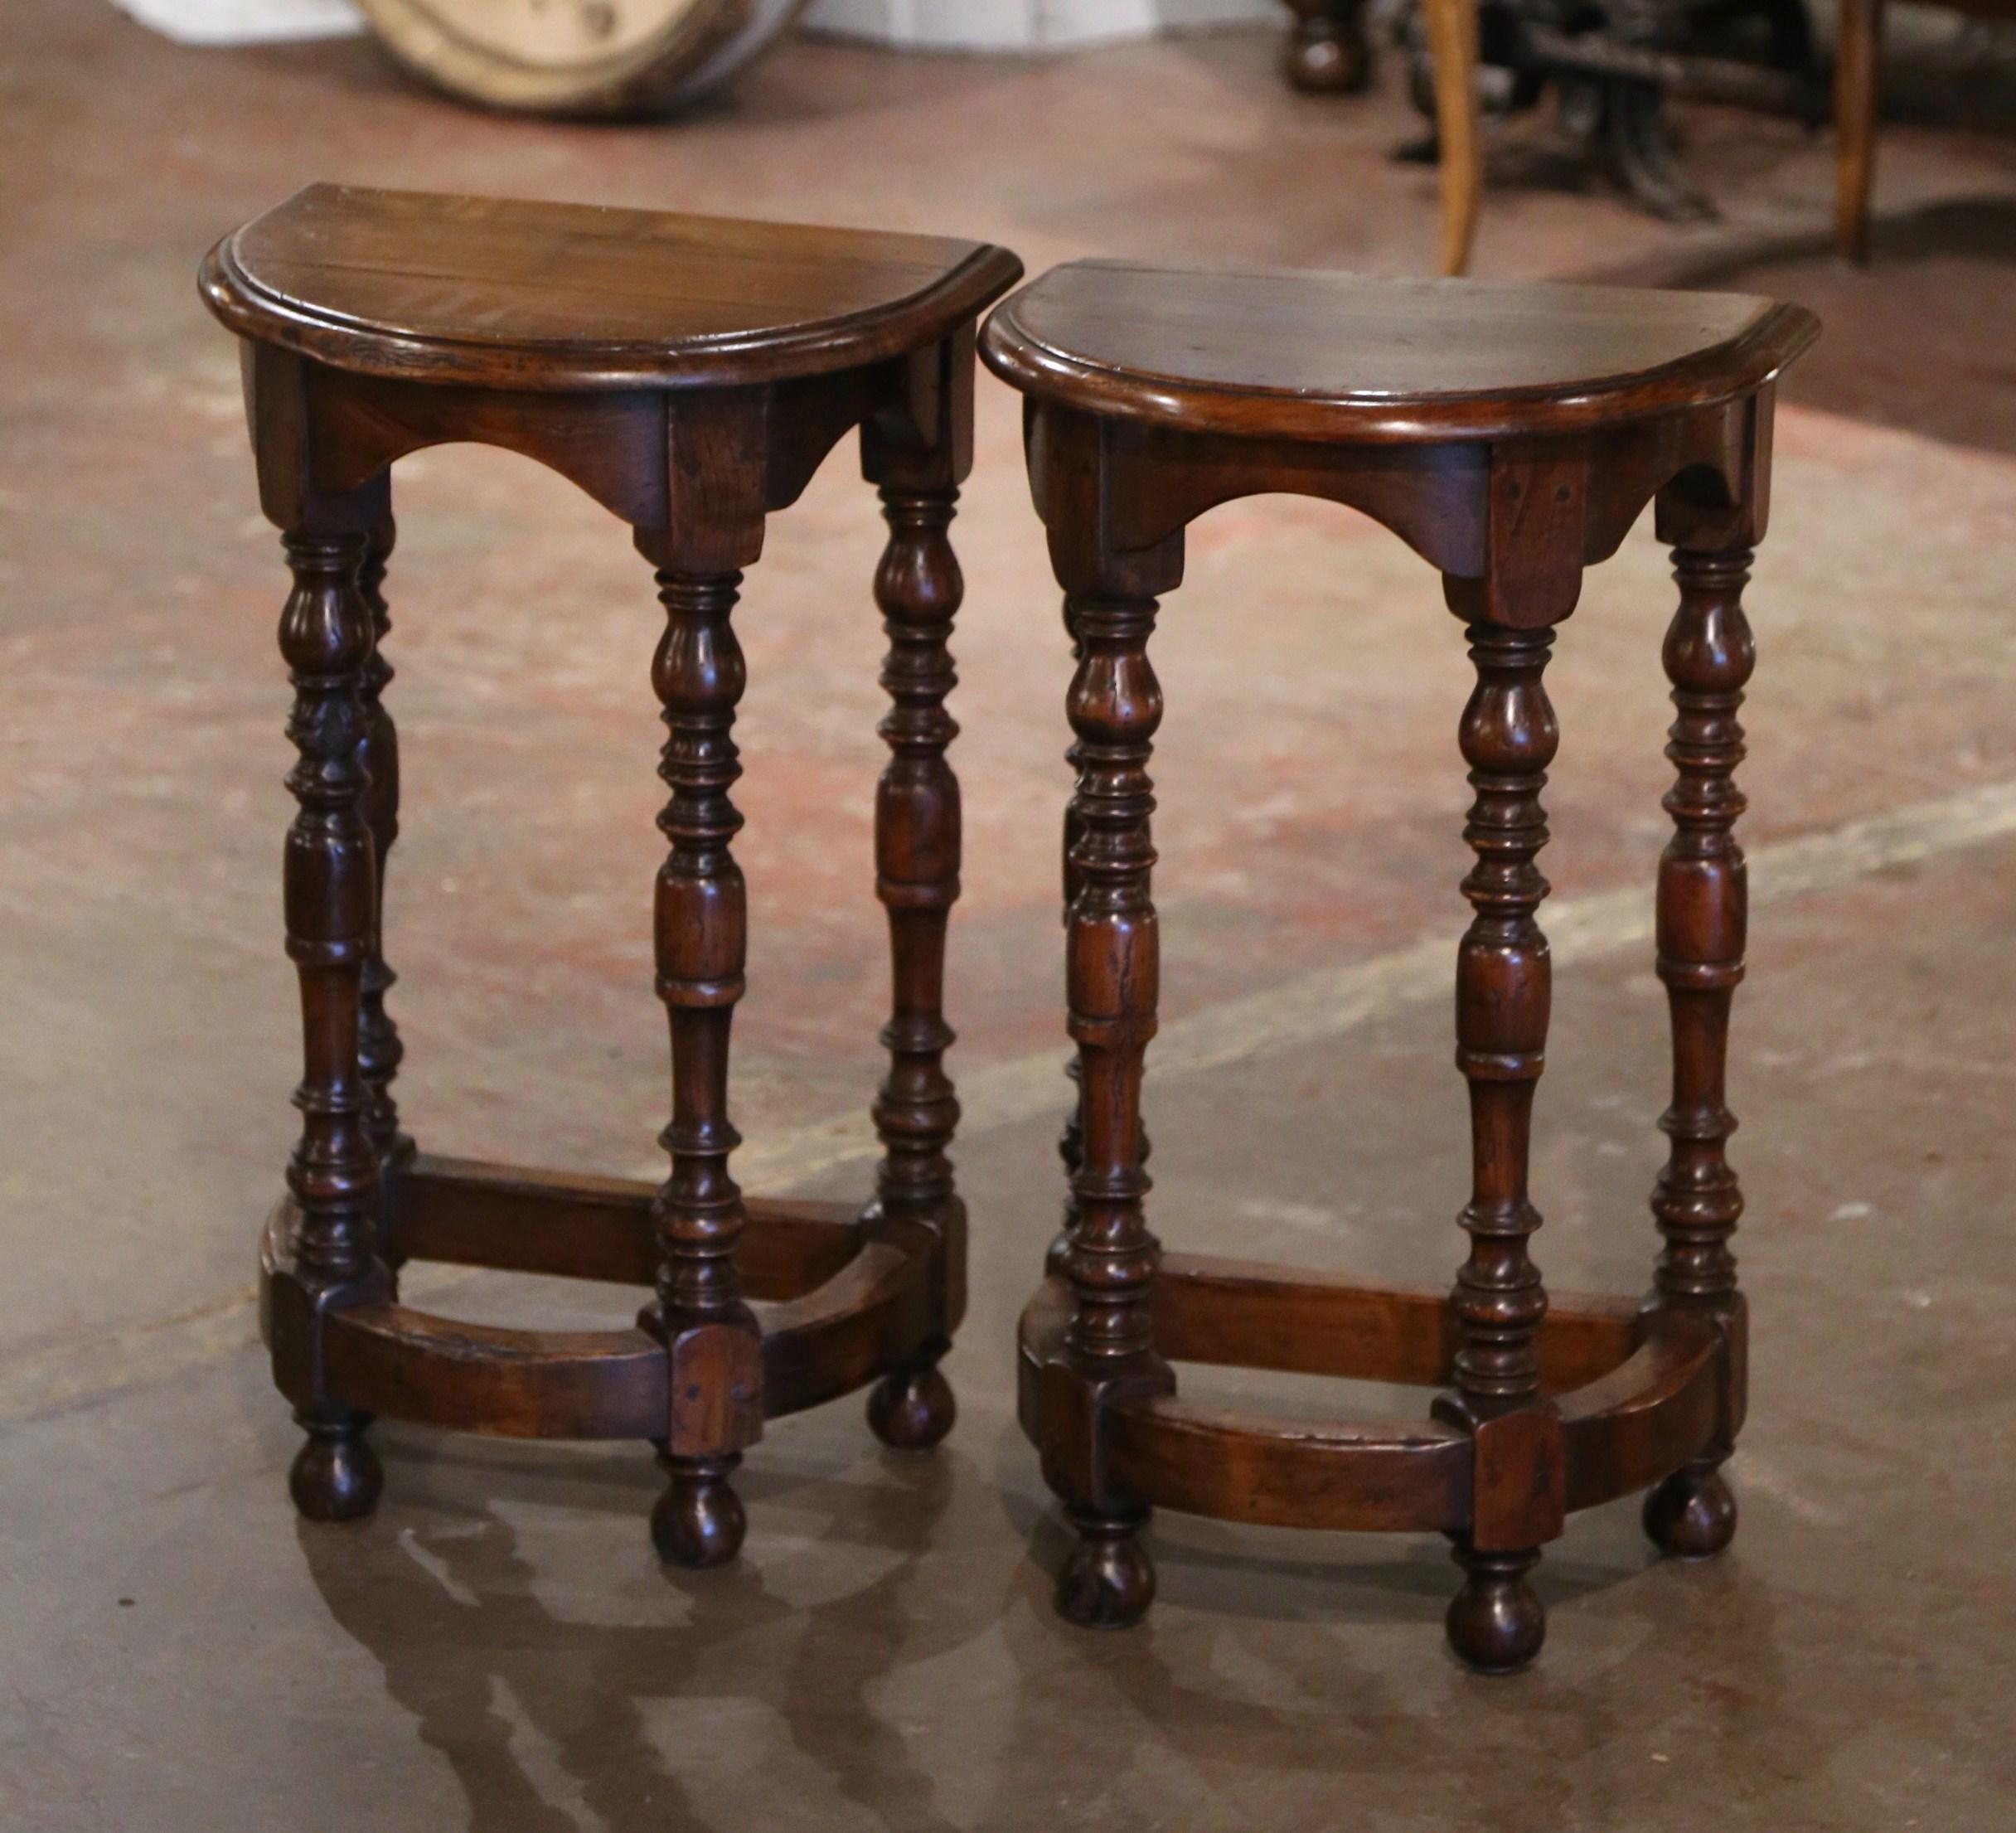 These elegant antique demilune side tables were created in France circa 1920. Built of oak, each table stands on four turned legs ending with bun feet, and connected with a sturdy stretcher at the bottom. The surface is dressed with a half moon